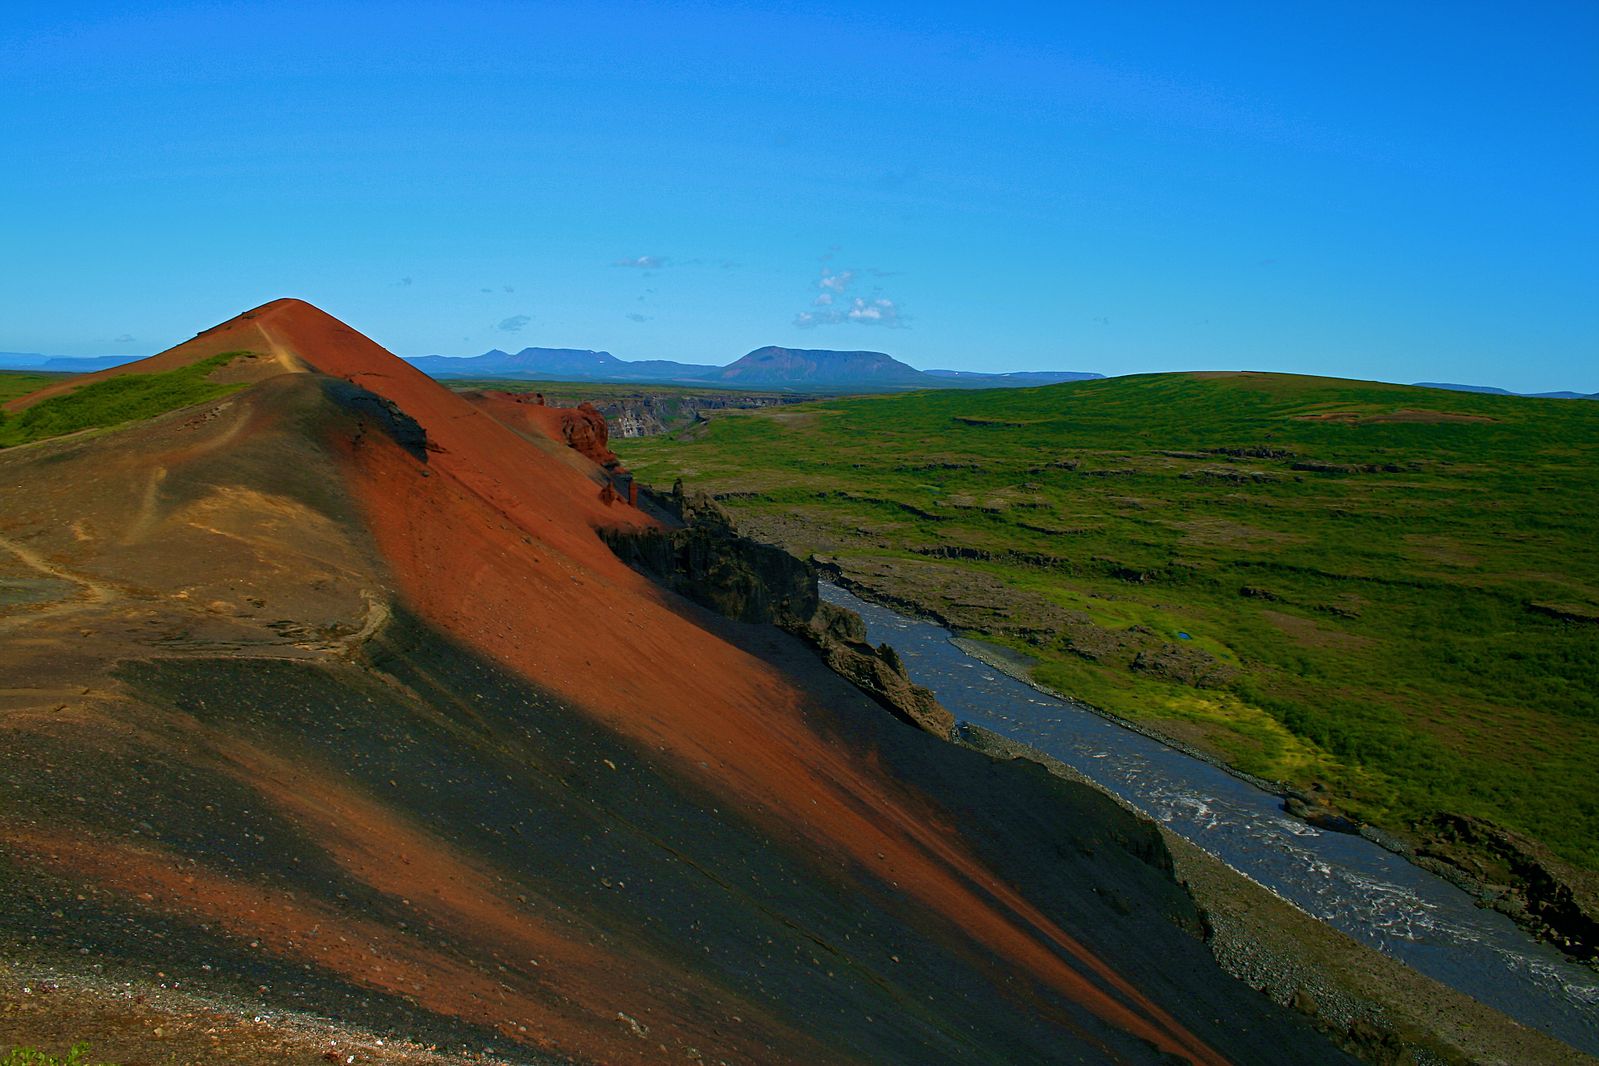 The Rauðhólar are all that remains of an ancient group of volcanic craters.